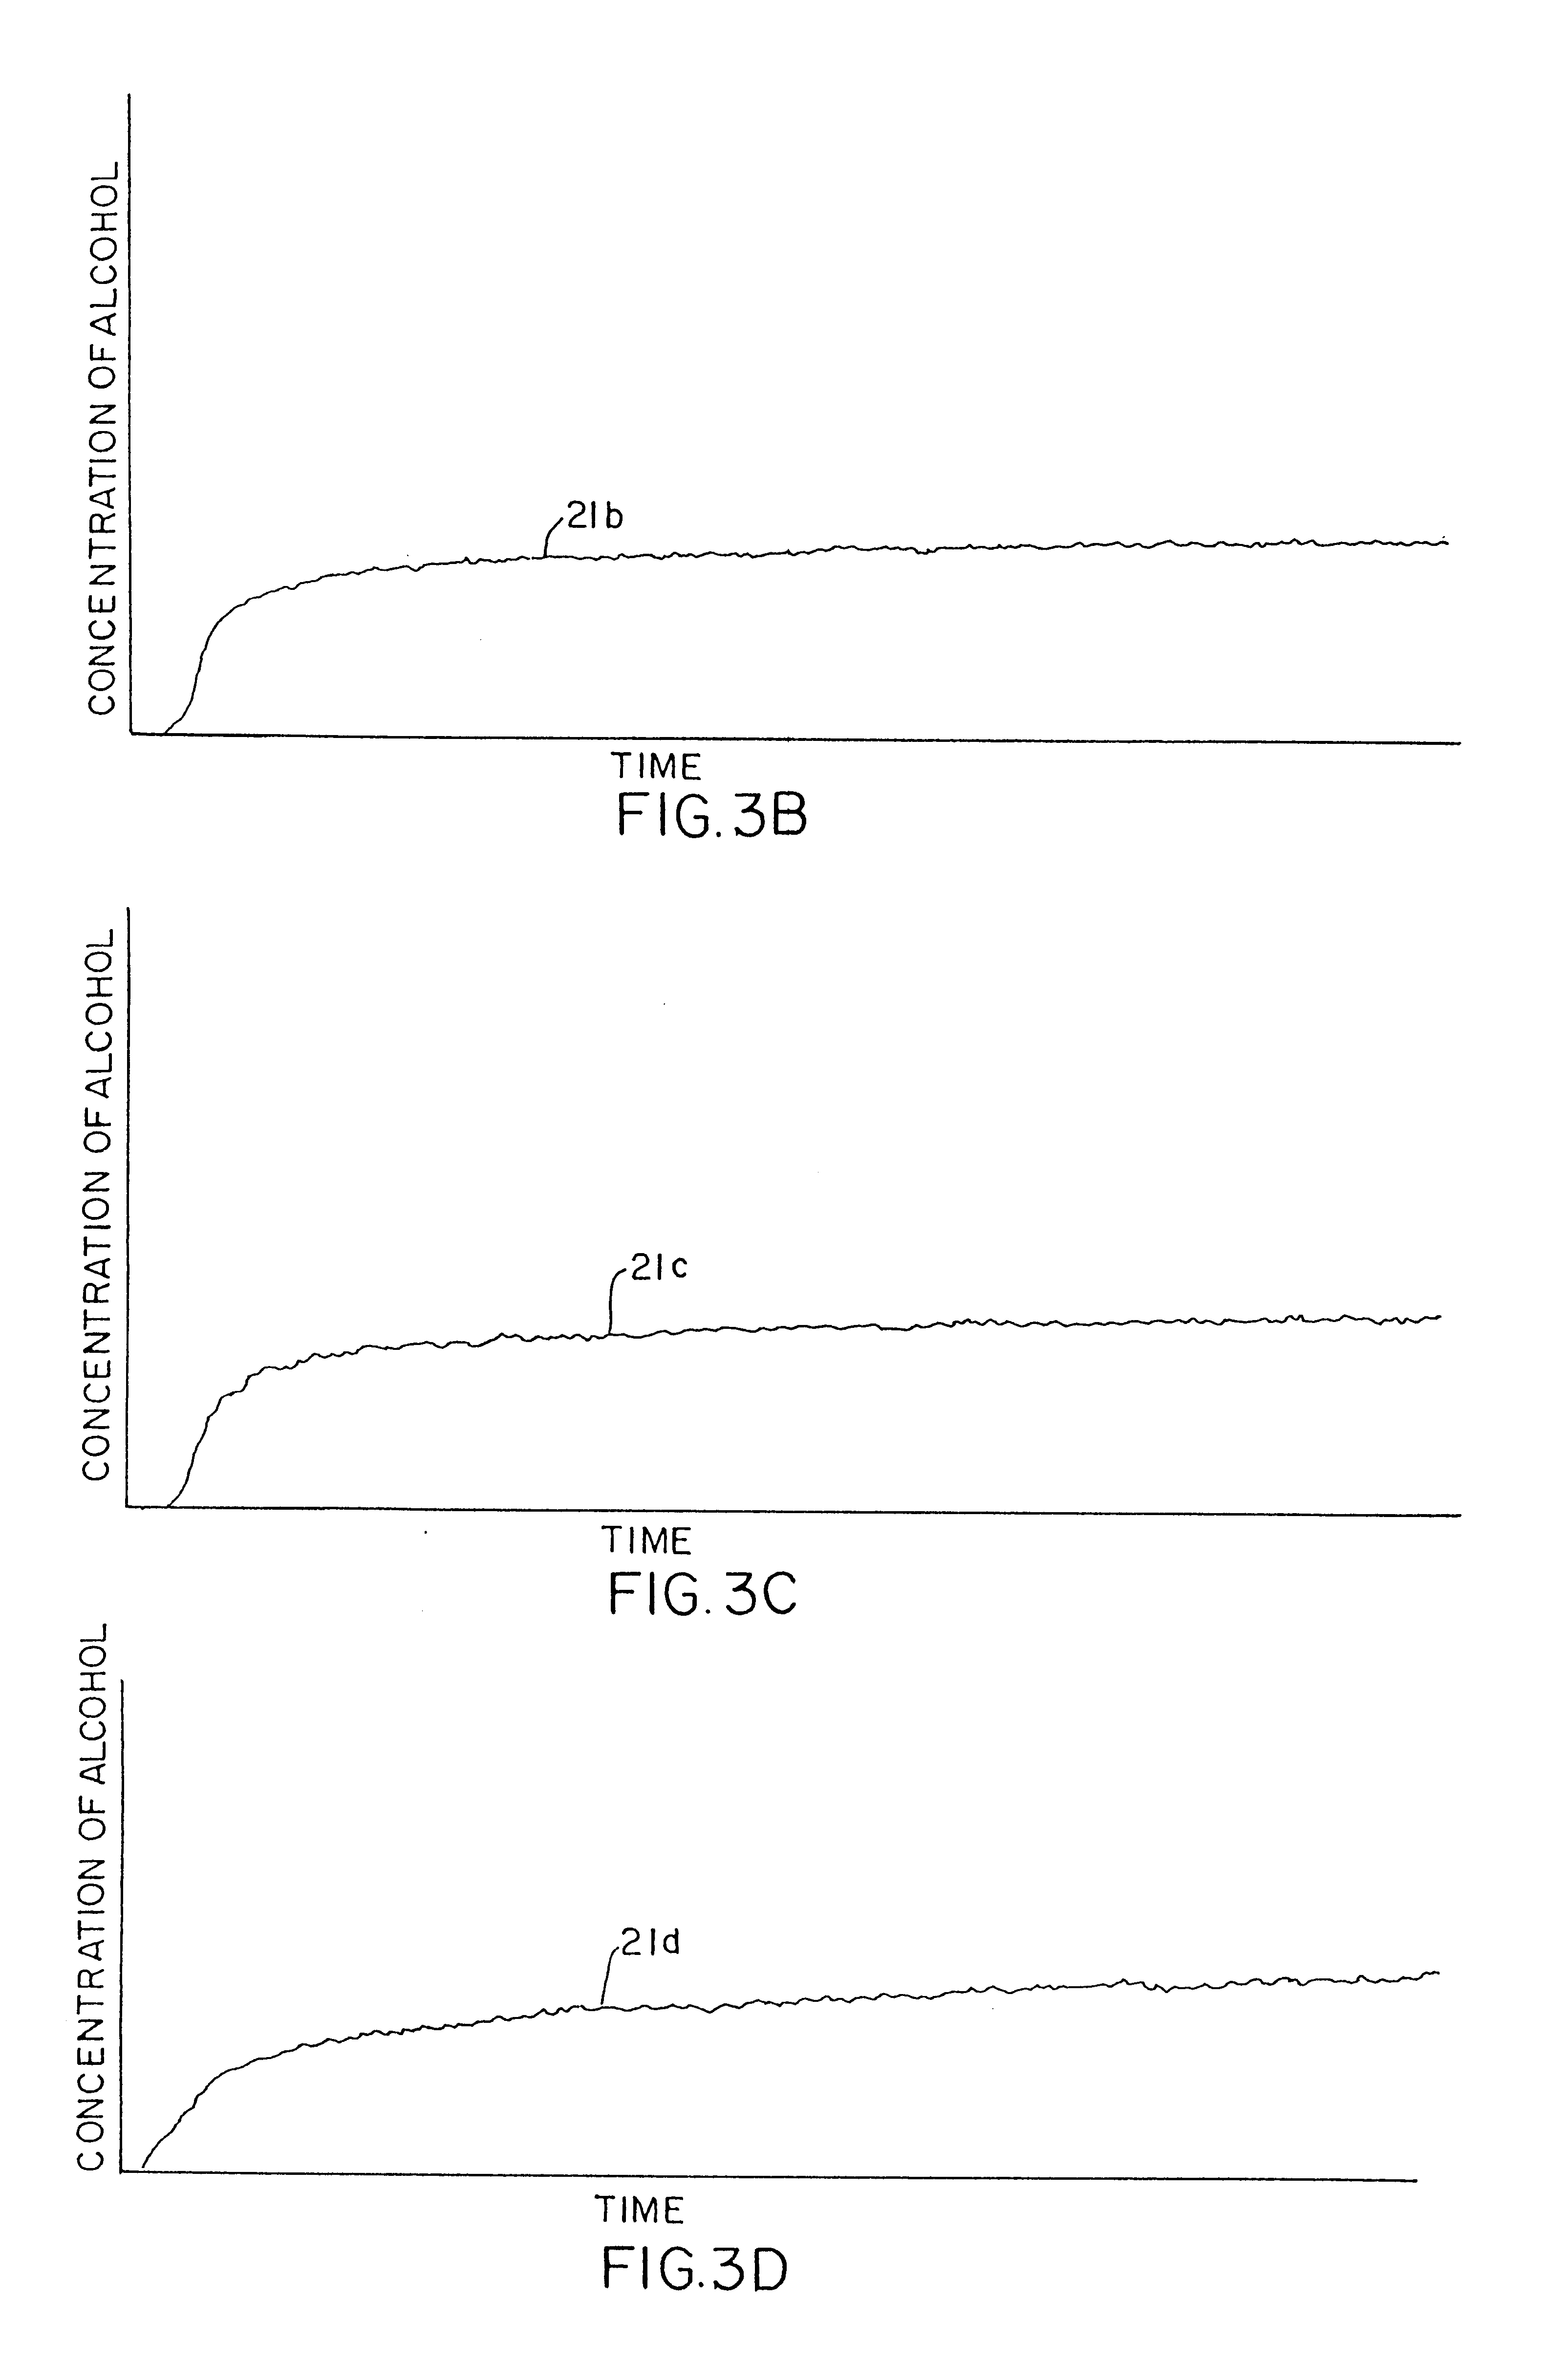 Apparatus for testing breath alcohol with discrimination between alveolar and upper respiratory tract alcohol